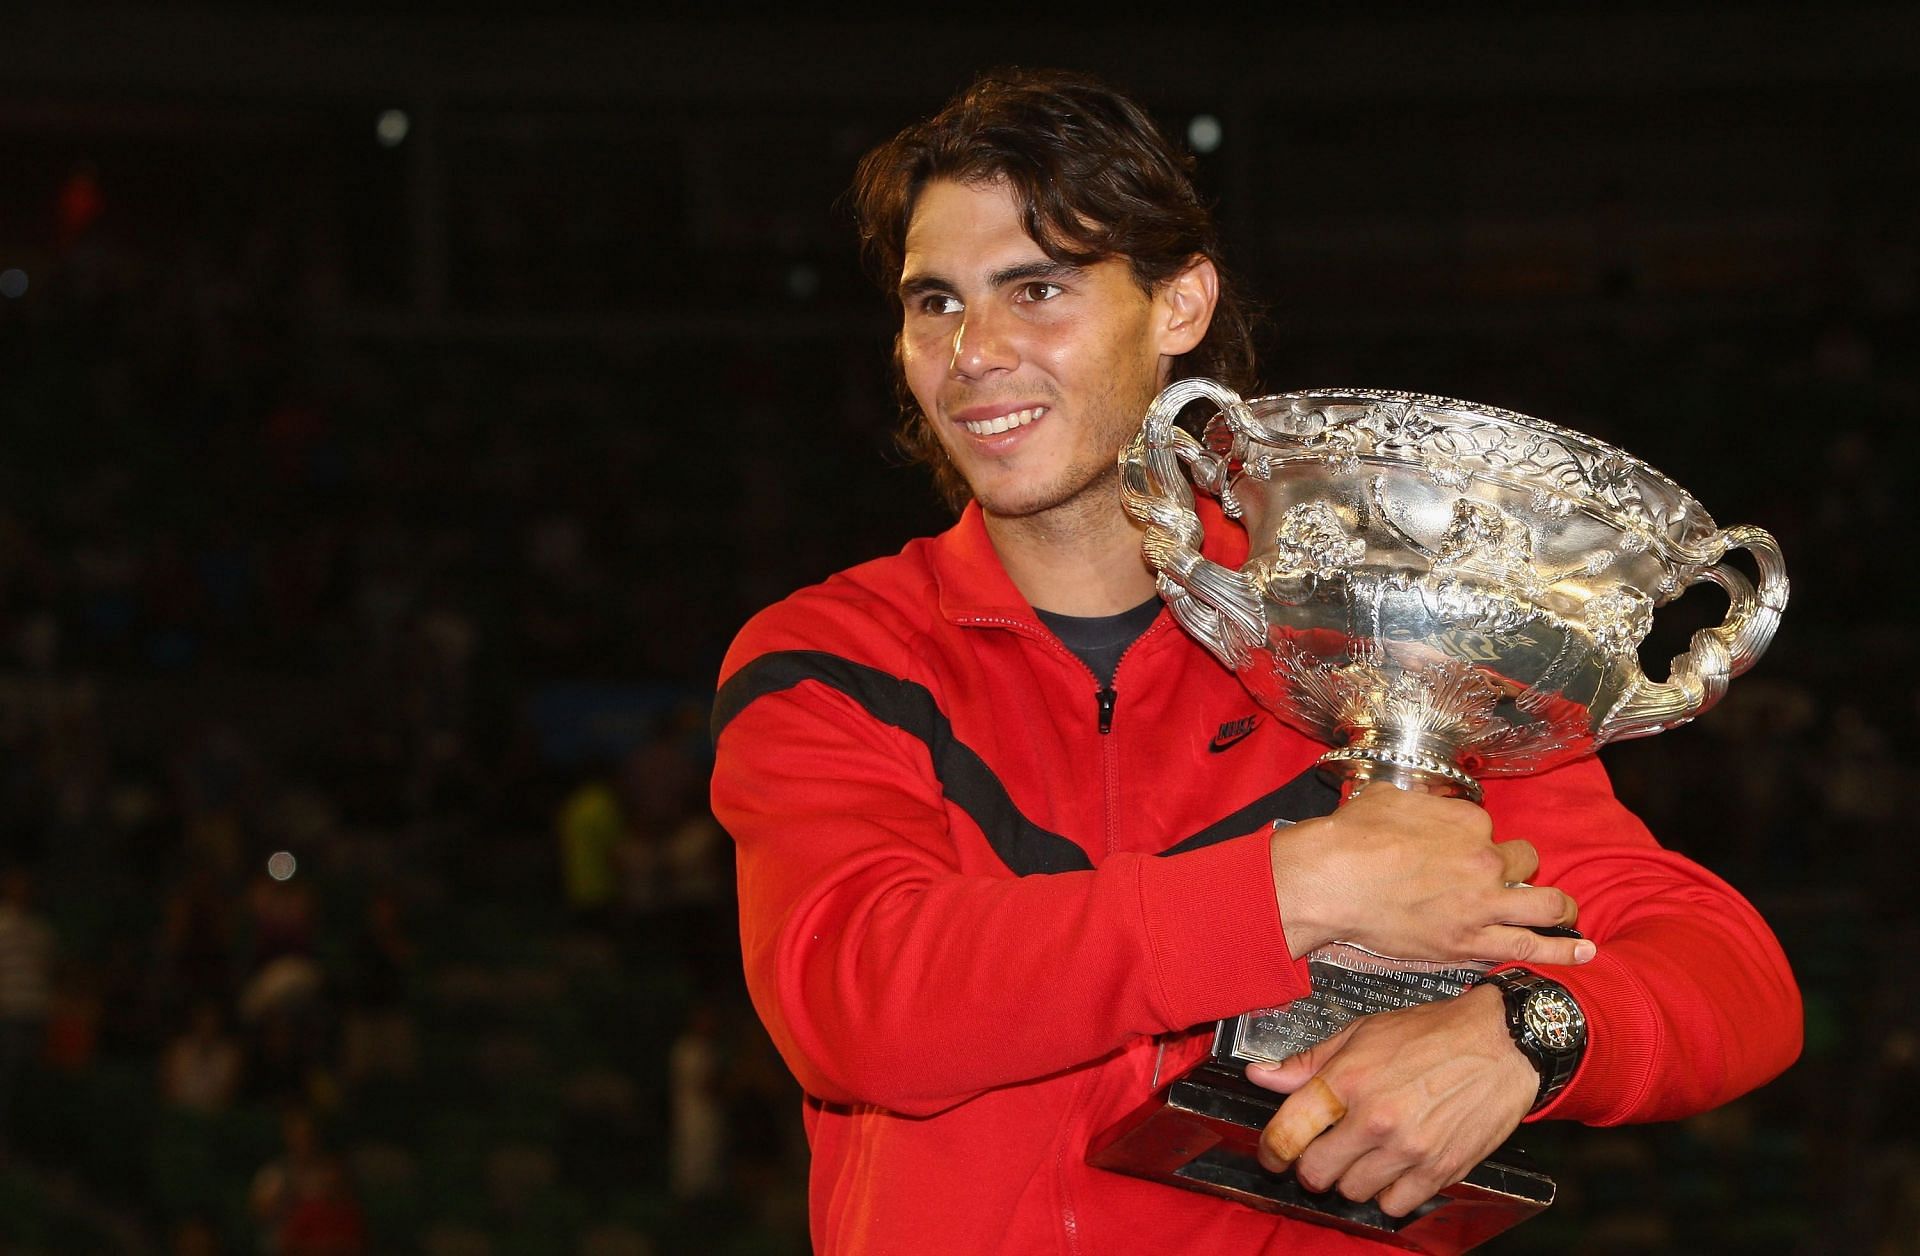 Rafael Nadal poses with the 2009 Australian Open trophy